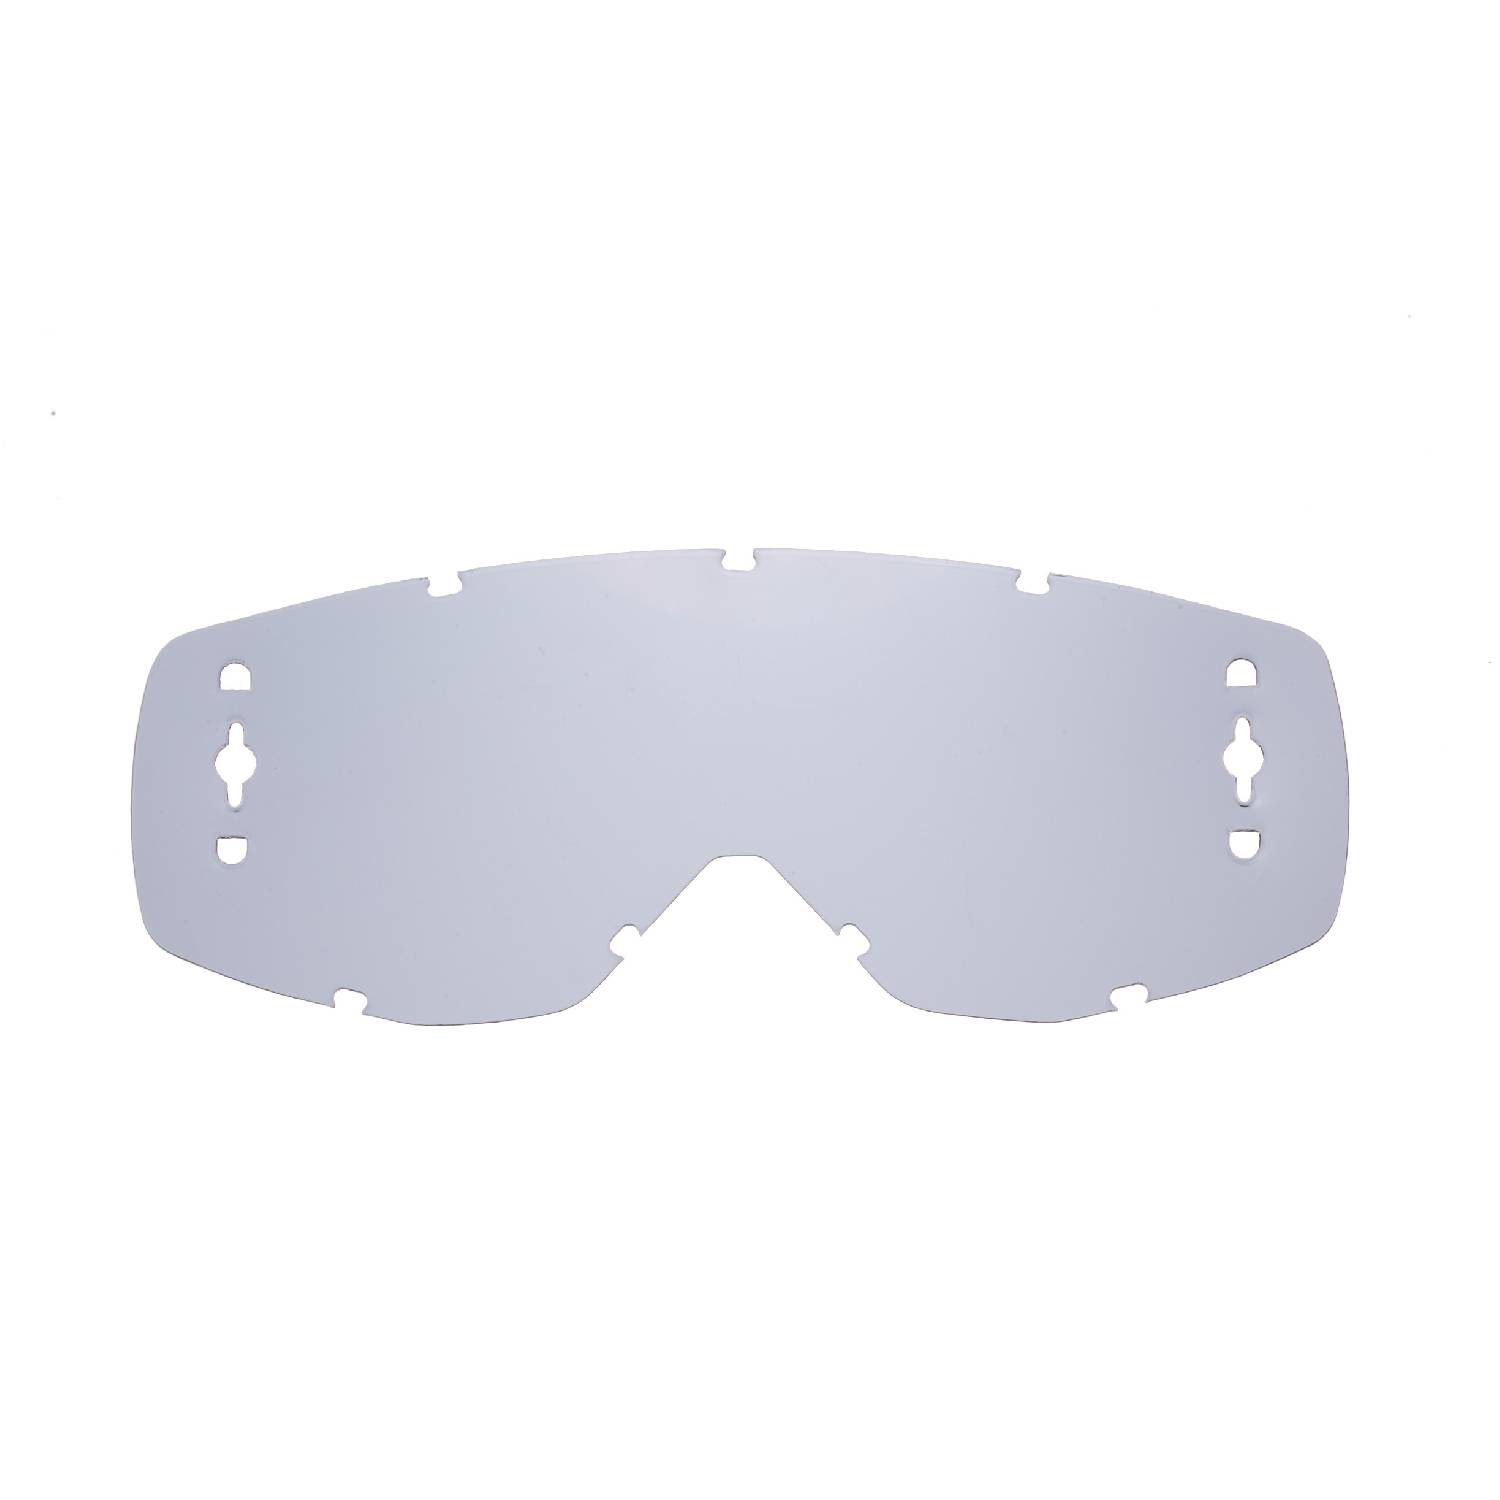 roll off lenses with smokey lenses compatible for Scott Hustle/ Primal / Tyrant / Split goggle